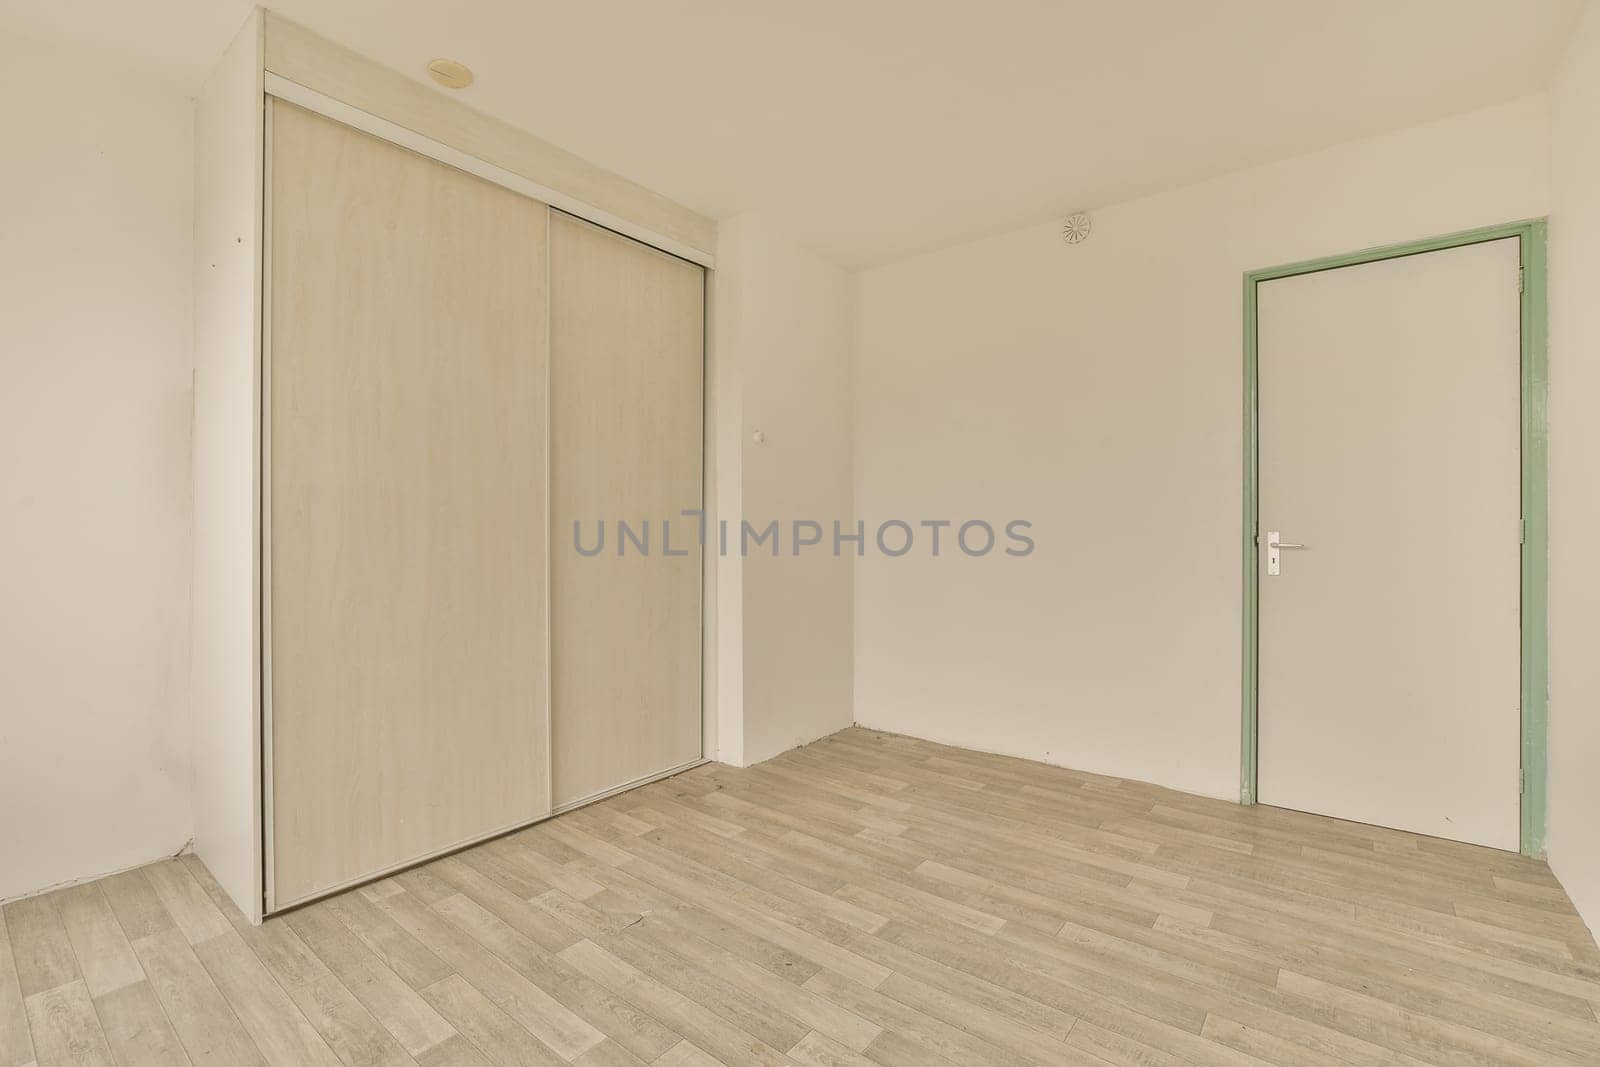 an empty room with white walls and wood flooring the door is open on the right side of the room